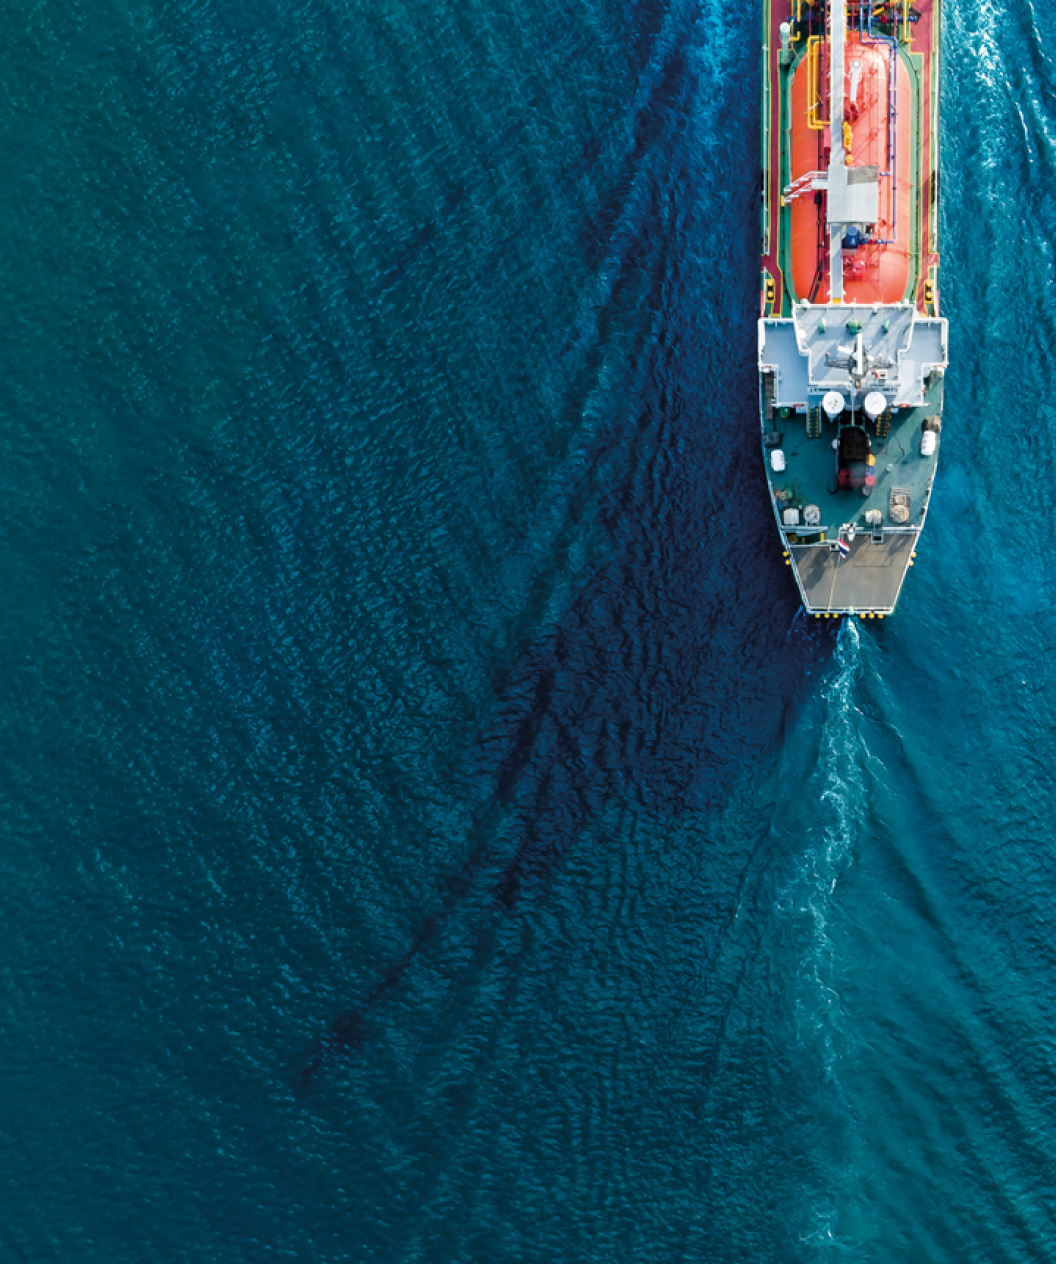 Arial view of a ship in the ocean